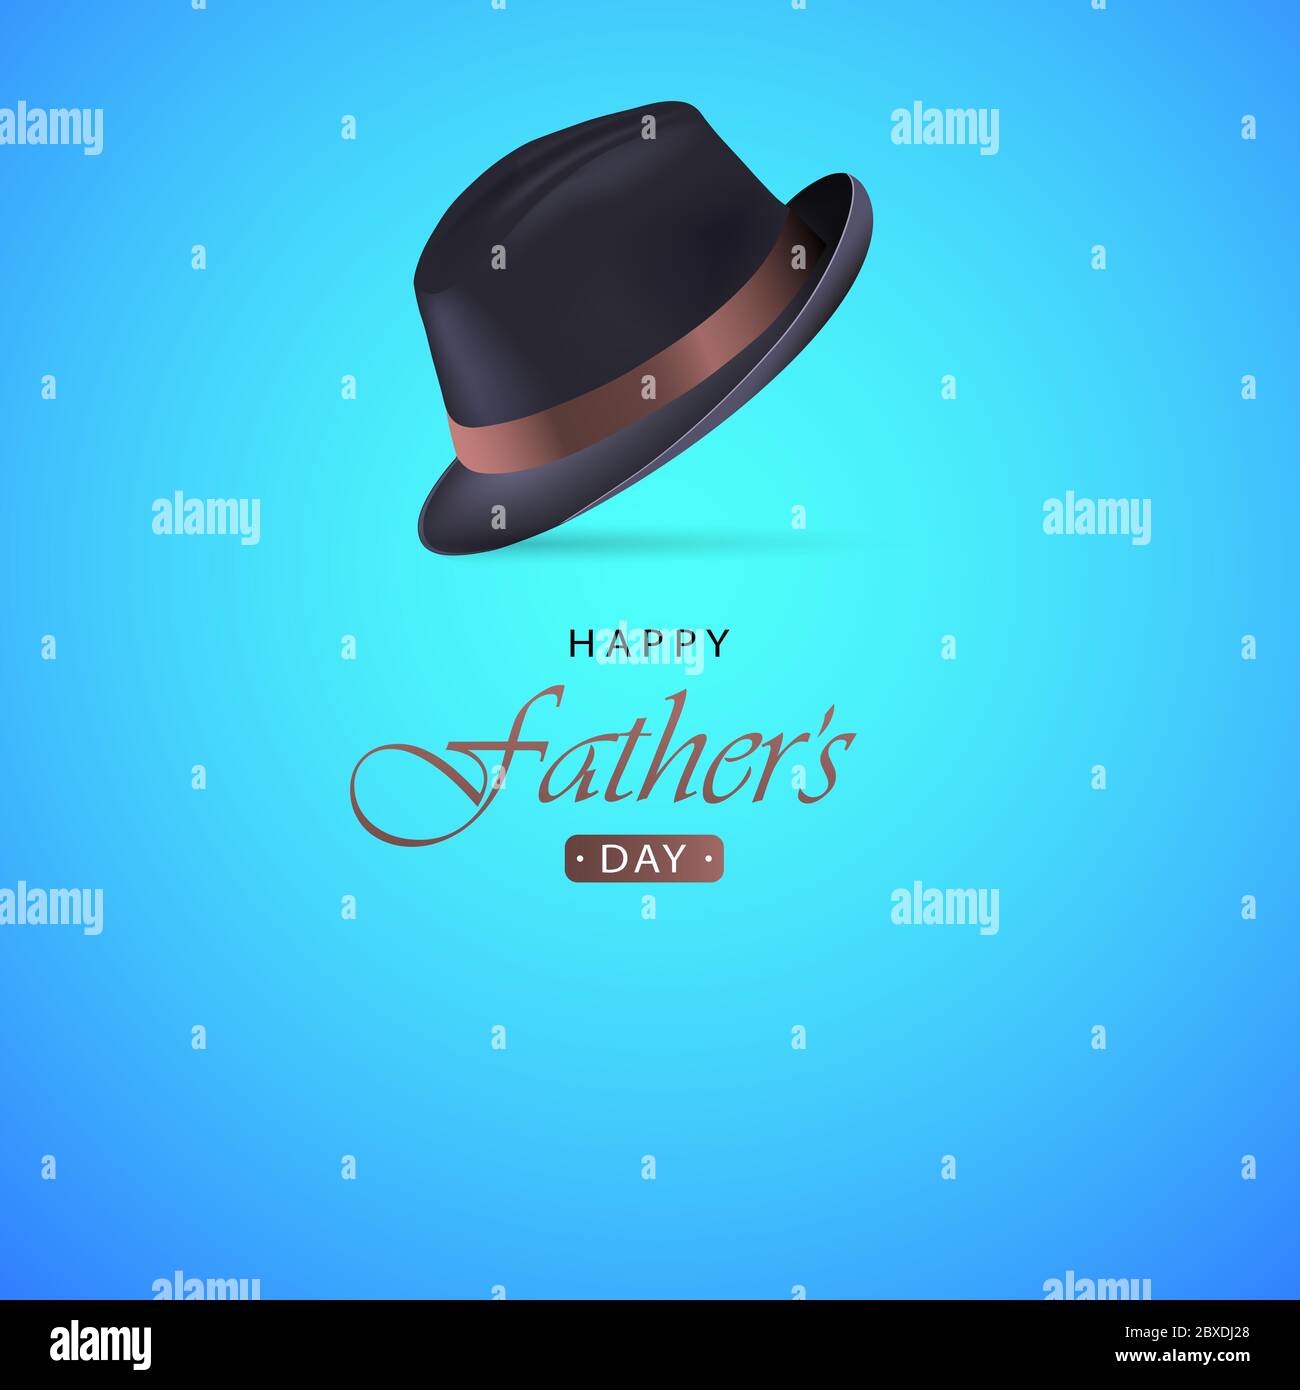 Happy Father’s Day Calligraphy greeting card Background Wallpaper of Vector illustration with Men Hats on Blue cyan color for male background. Stock Vector